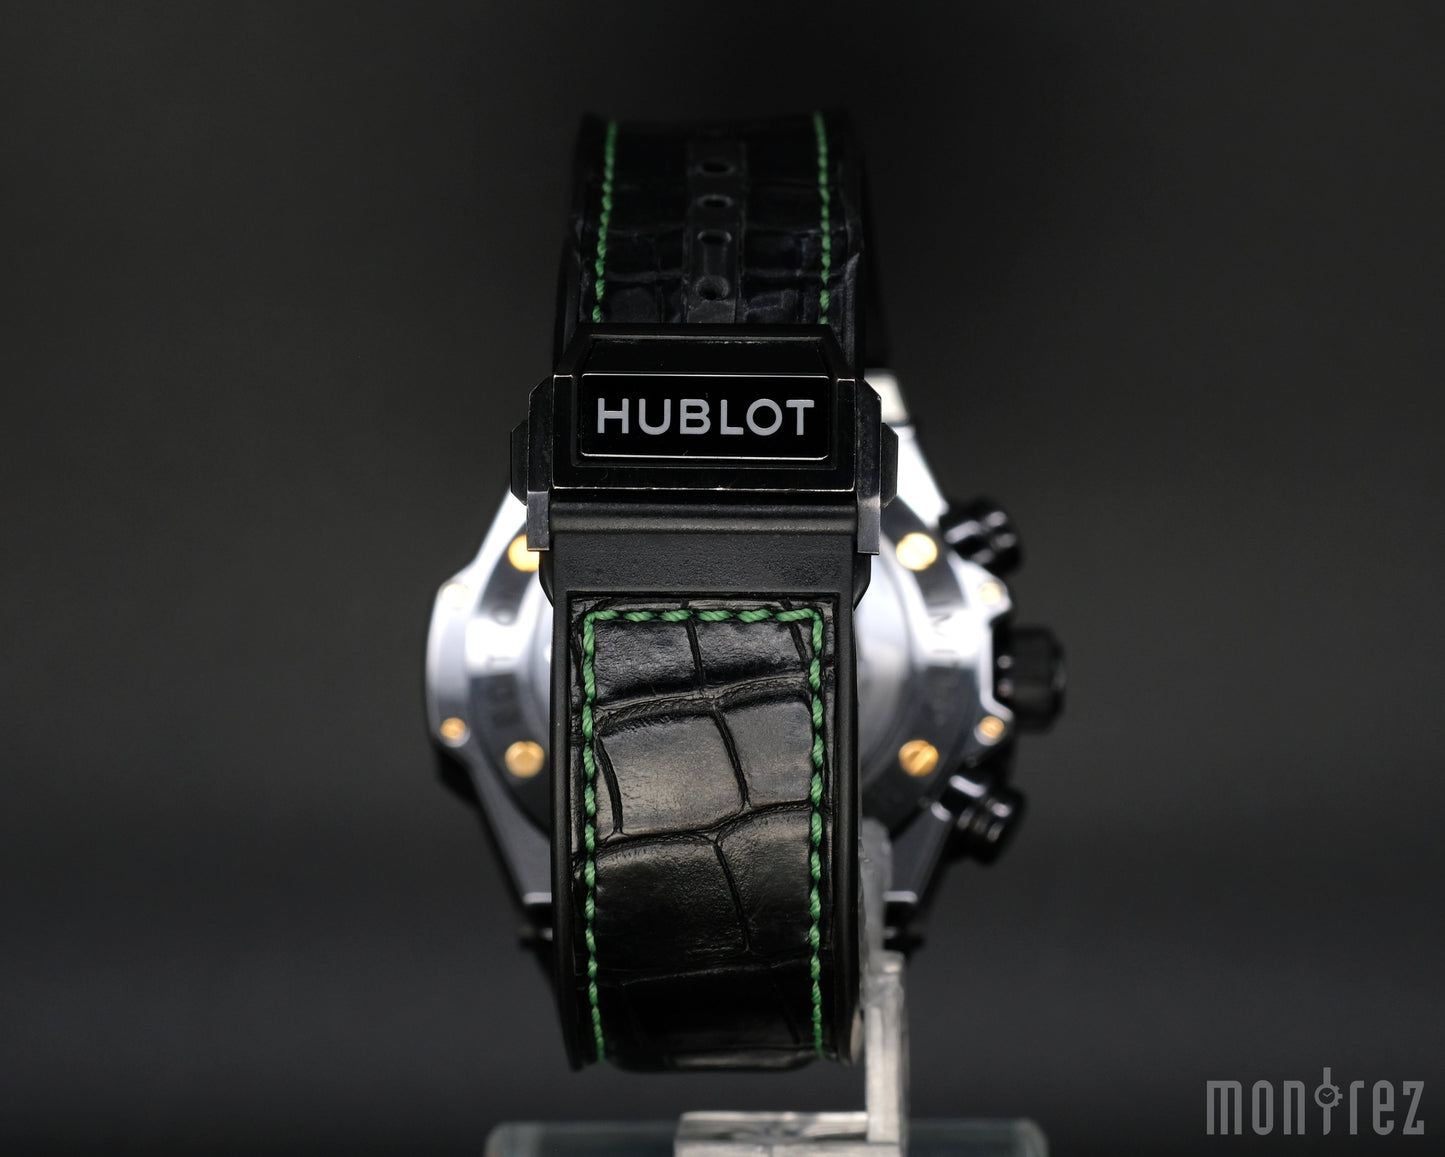 [Pre-Owned Watch] Hublot Big Bang Unico Ceramic Usain Bolt Limited Edition Watch 45mm 411.CX.1189.VR.USB16 (Limited Edition of 250 Pieces)